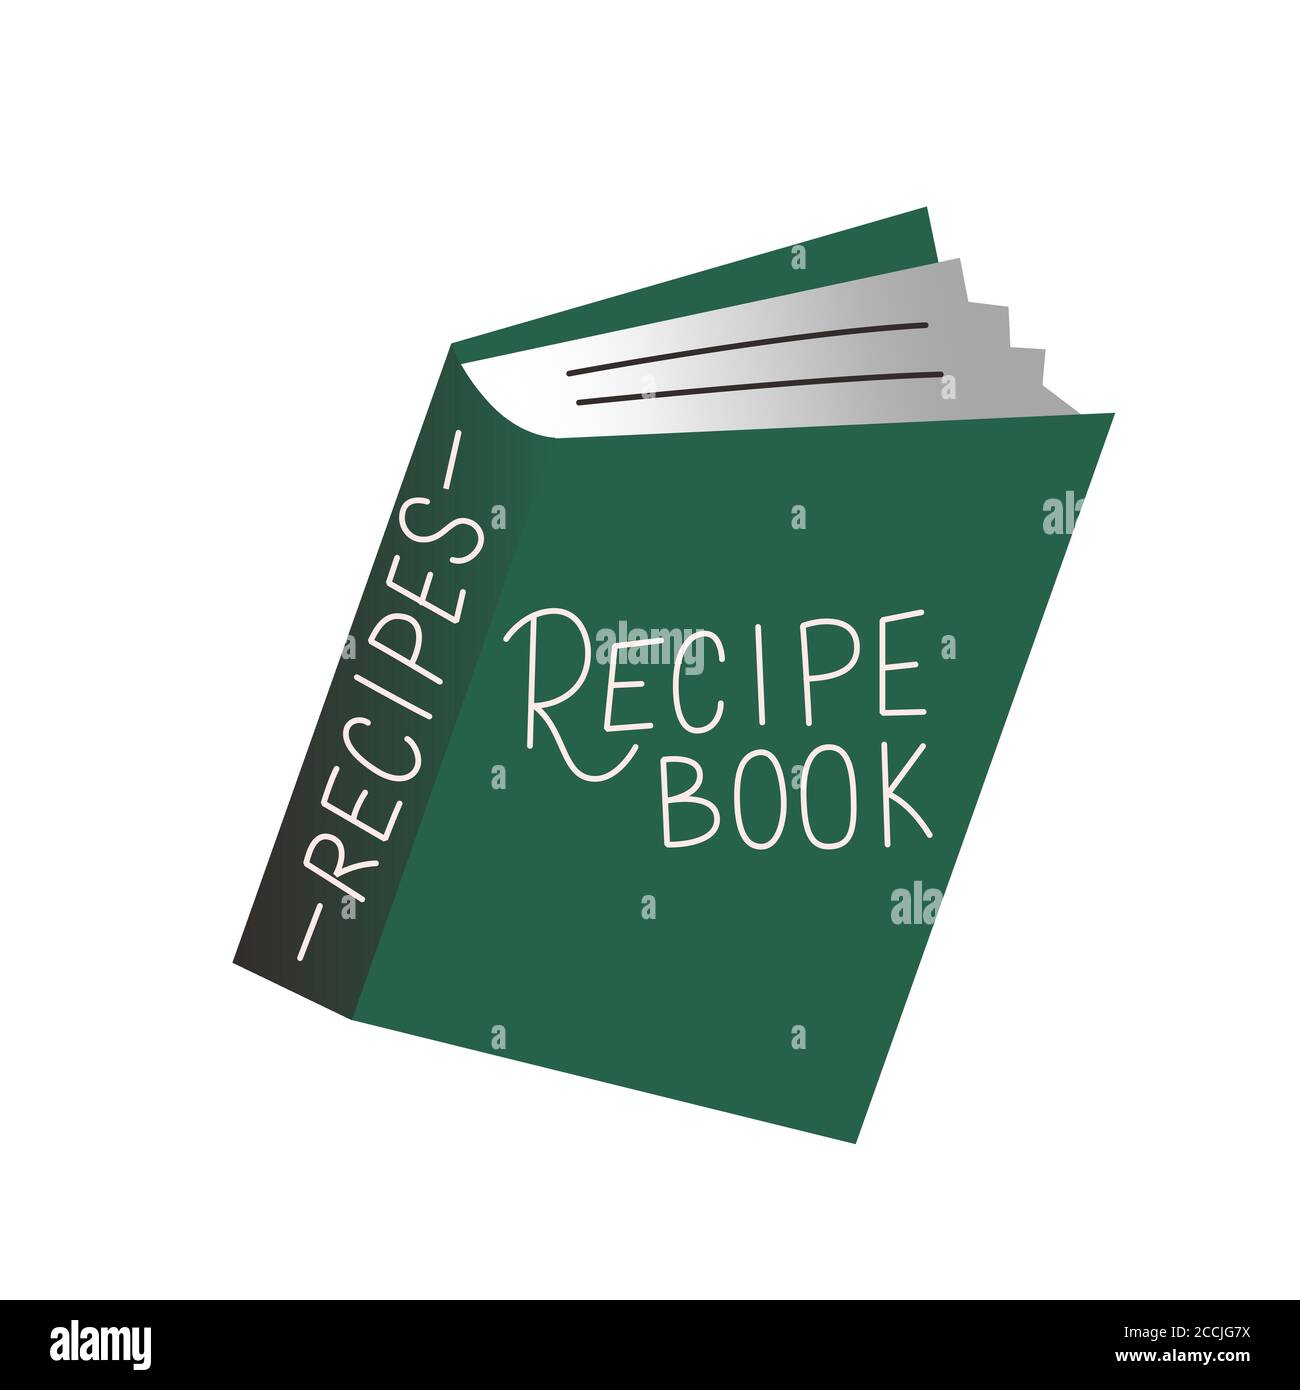 https://c8.alamy.com/comp/2CCJG7X/vintage-recipe-book-doodle-icon-cooking-book-isolated-vector-icon-on-white-background-hand-drawn-cartoon-illustration-2CCJG7X.jpg